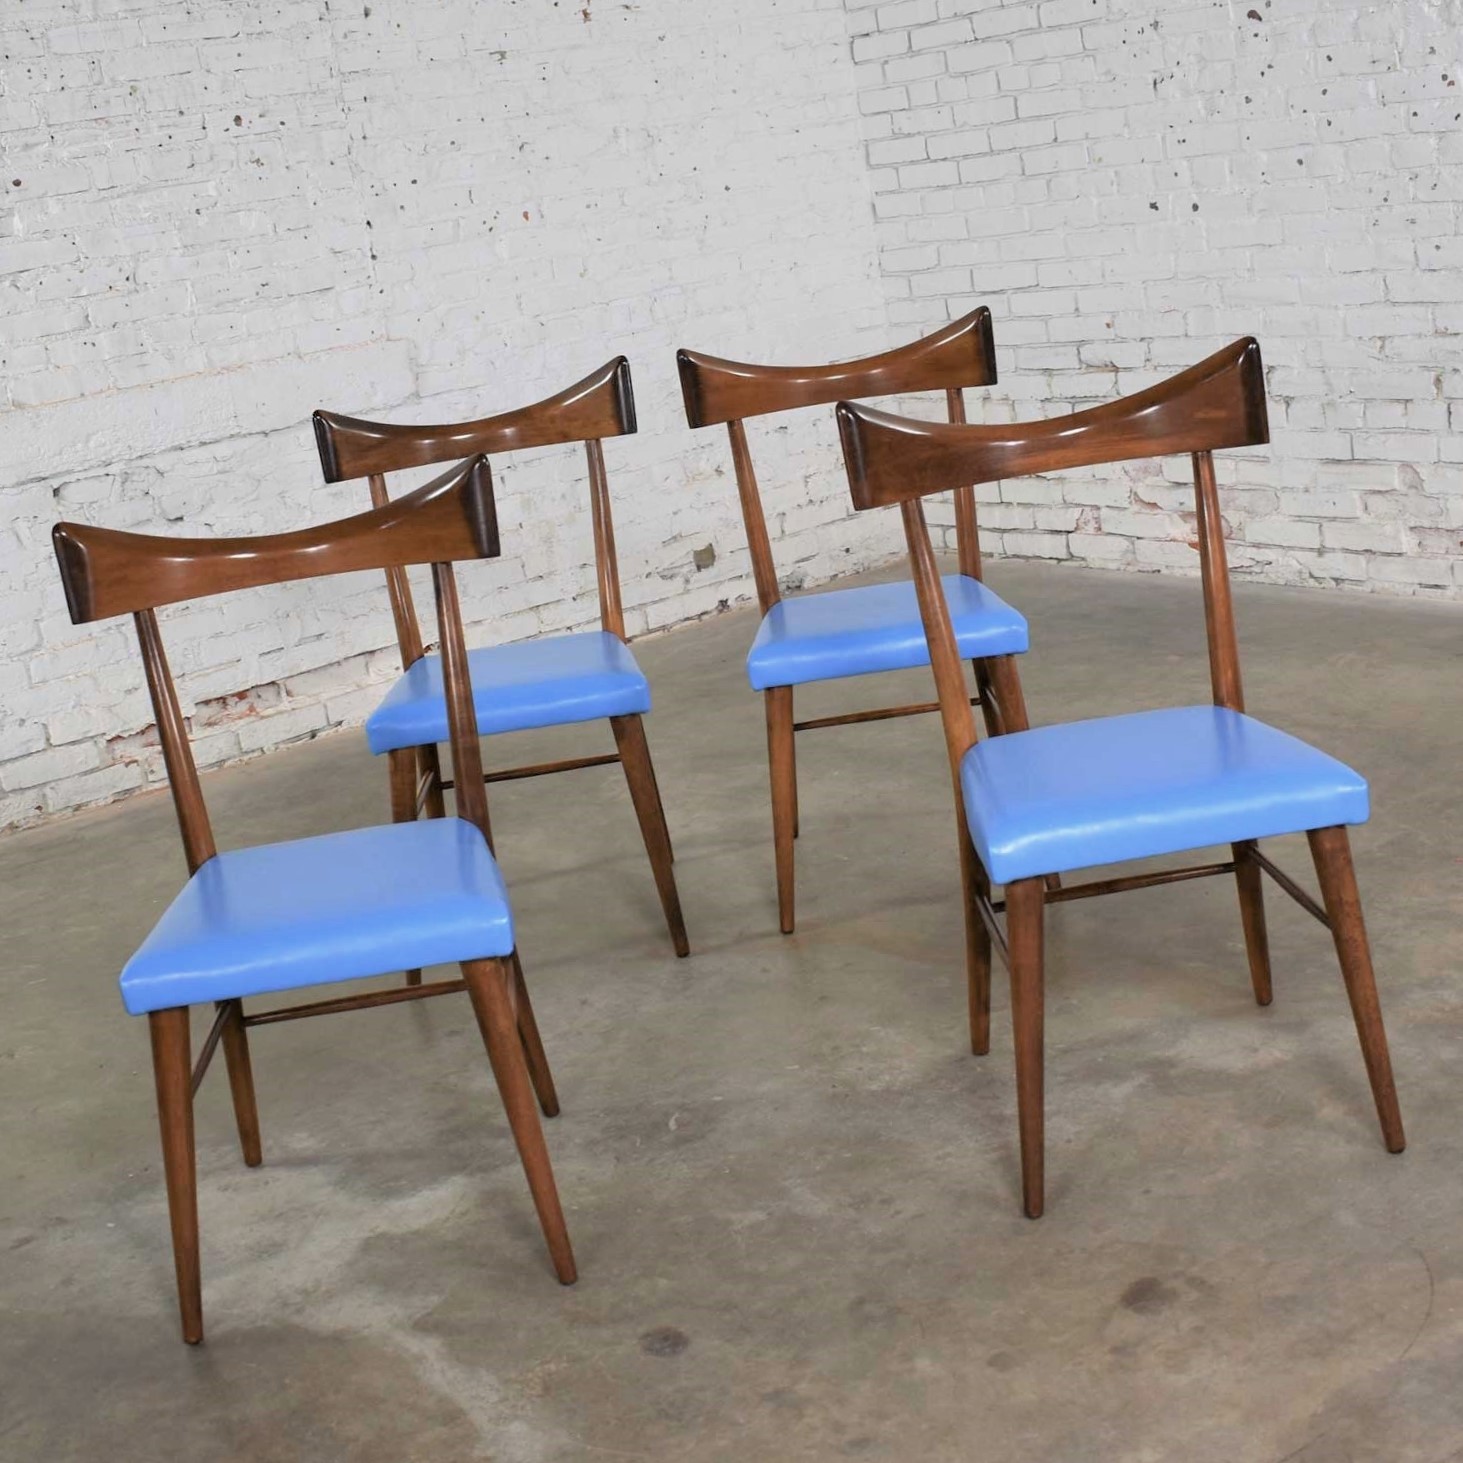 Set 4 Mid Century Modern Planner Group Dining Chairs by Paul McCobb for Winchendon